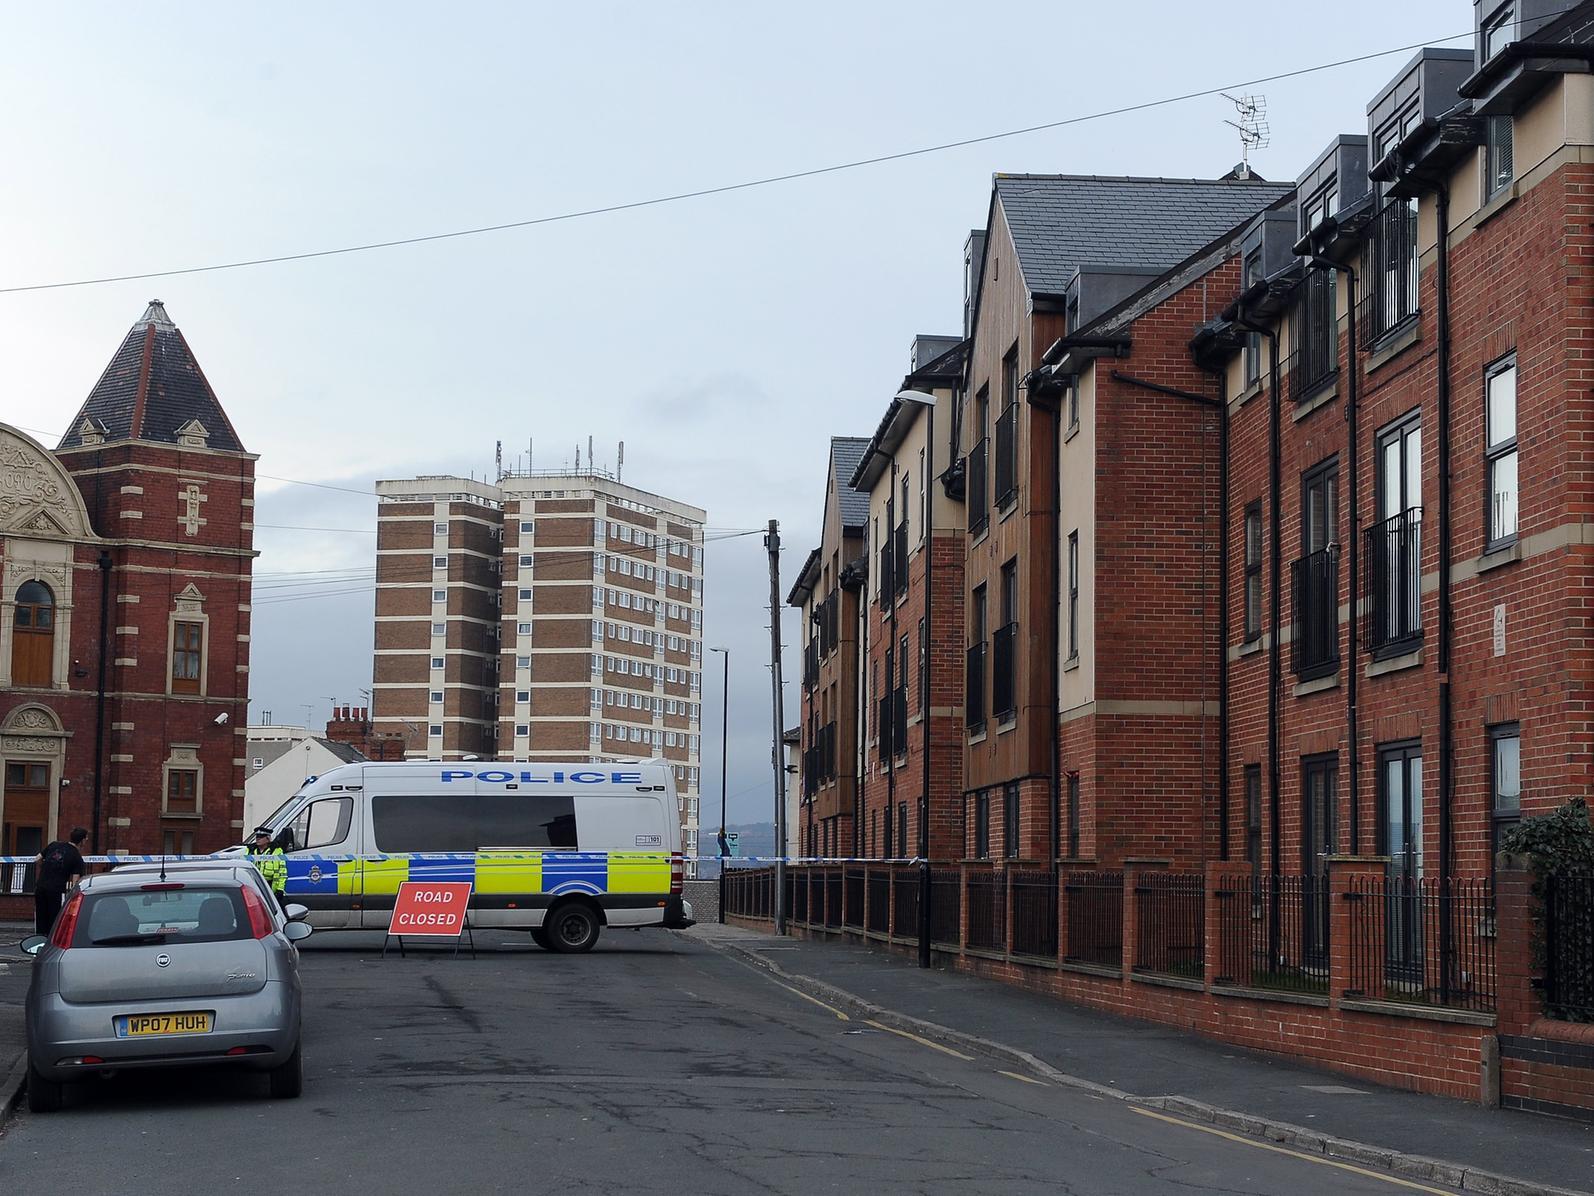 There were 115 reports of violence and sexual offences in Armley and the surrounding area